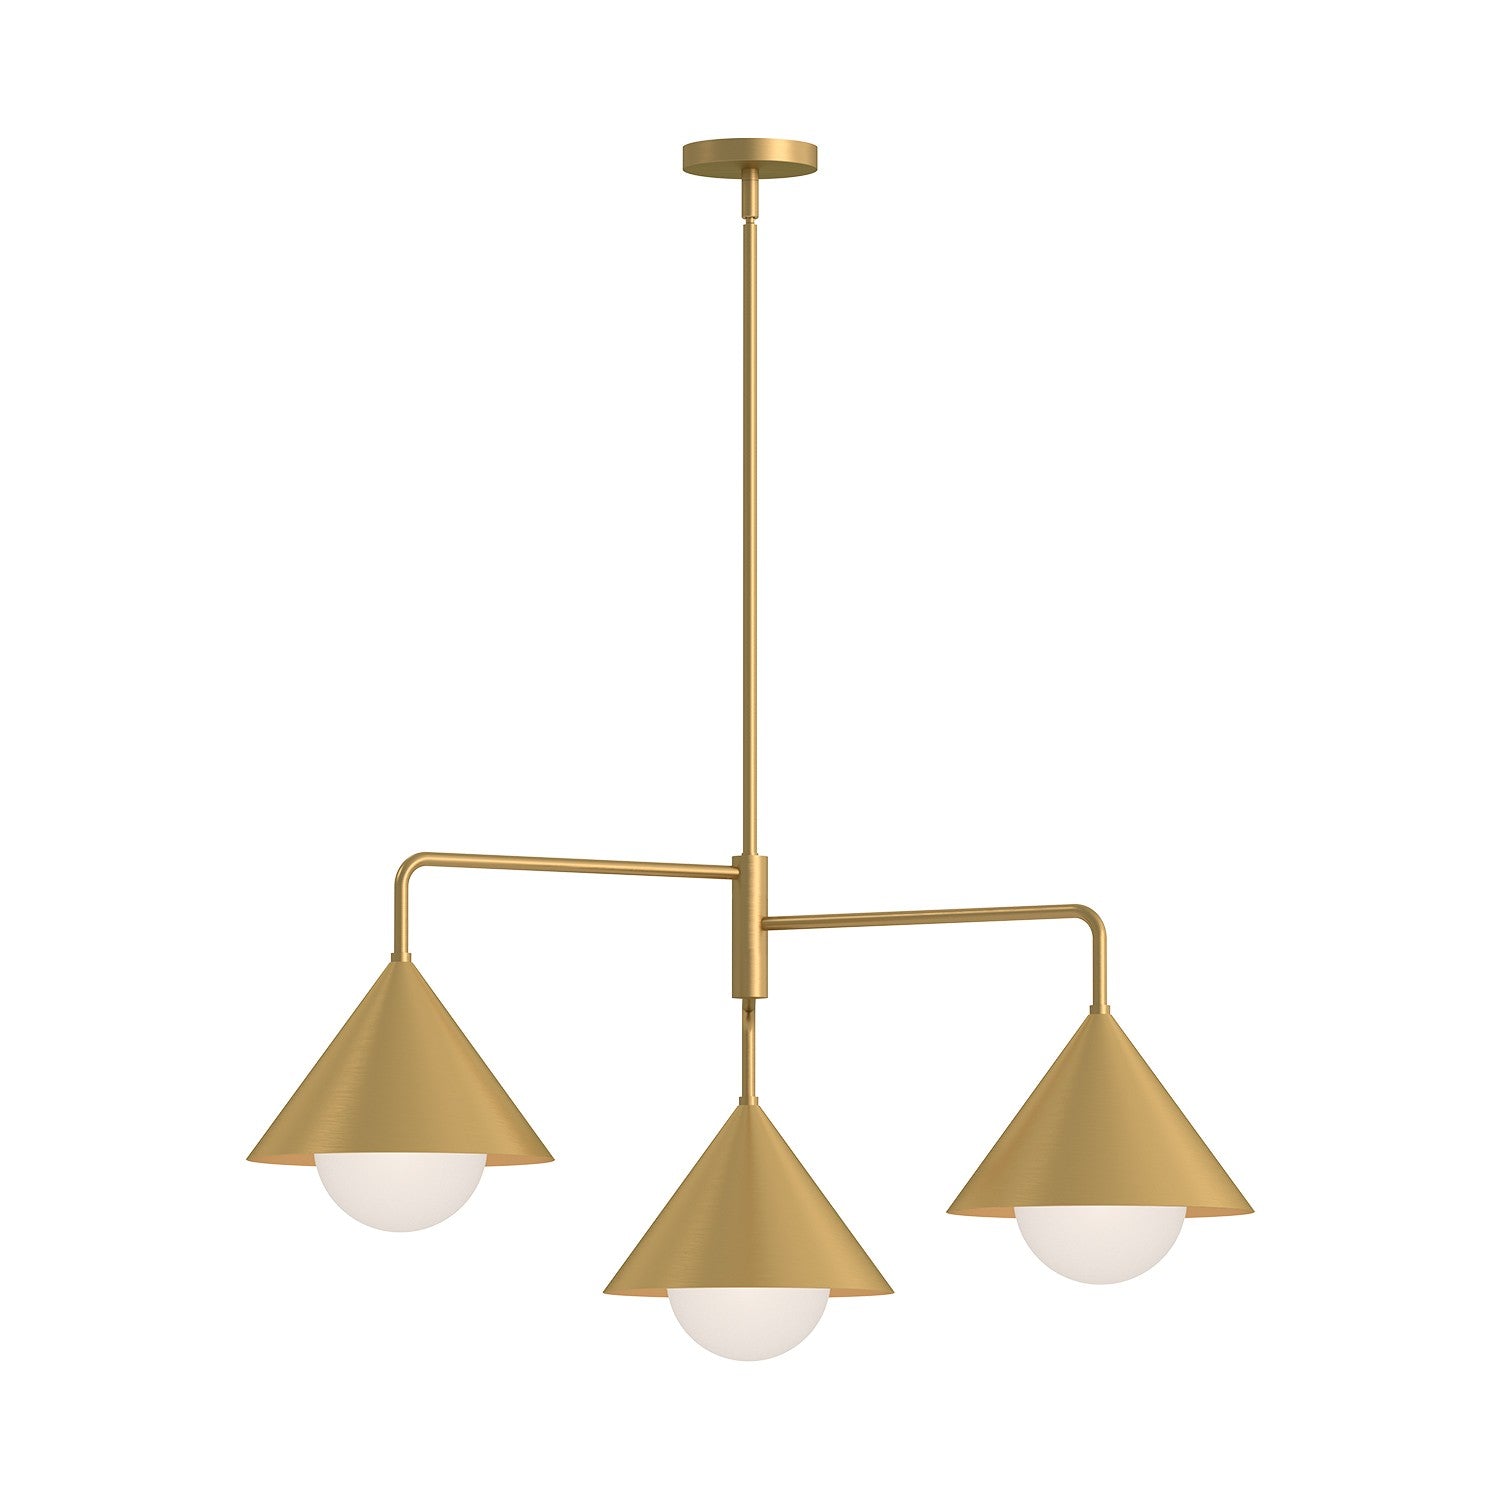 Alora Canada - Three Light Chandelier - Remy - Brushed Gold/Opal Glass- Union Lighting Luminaires Decor